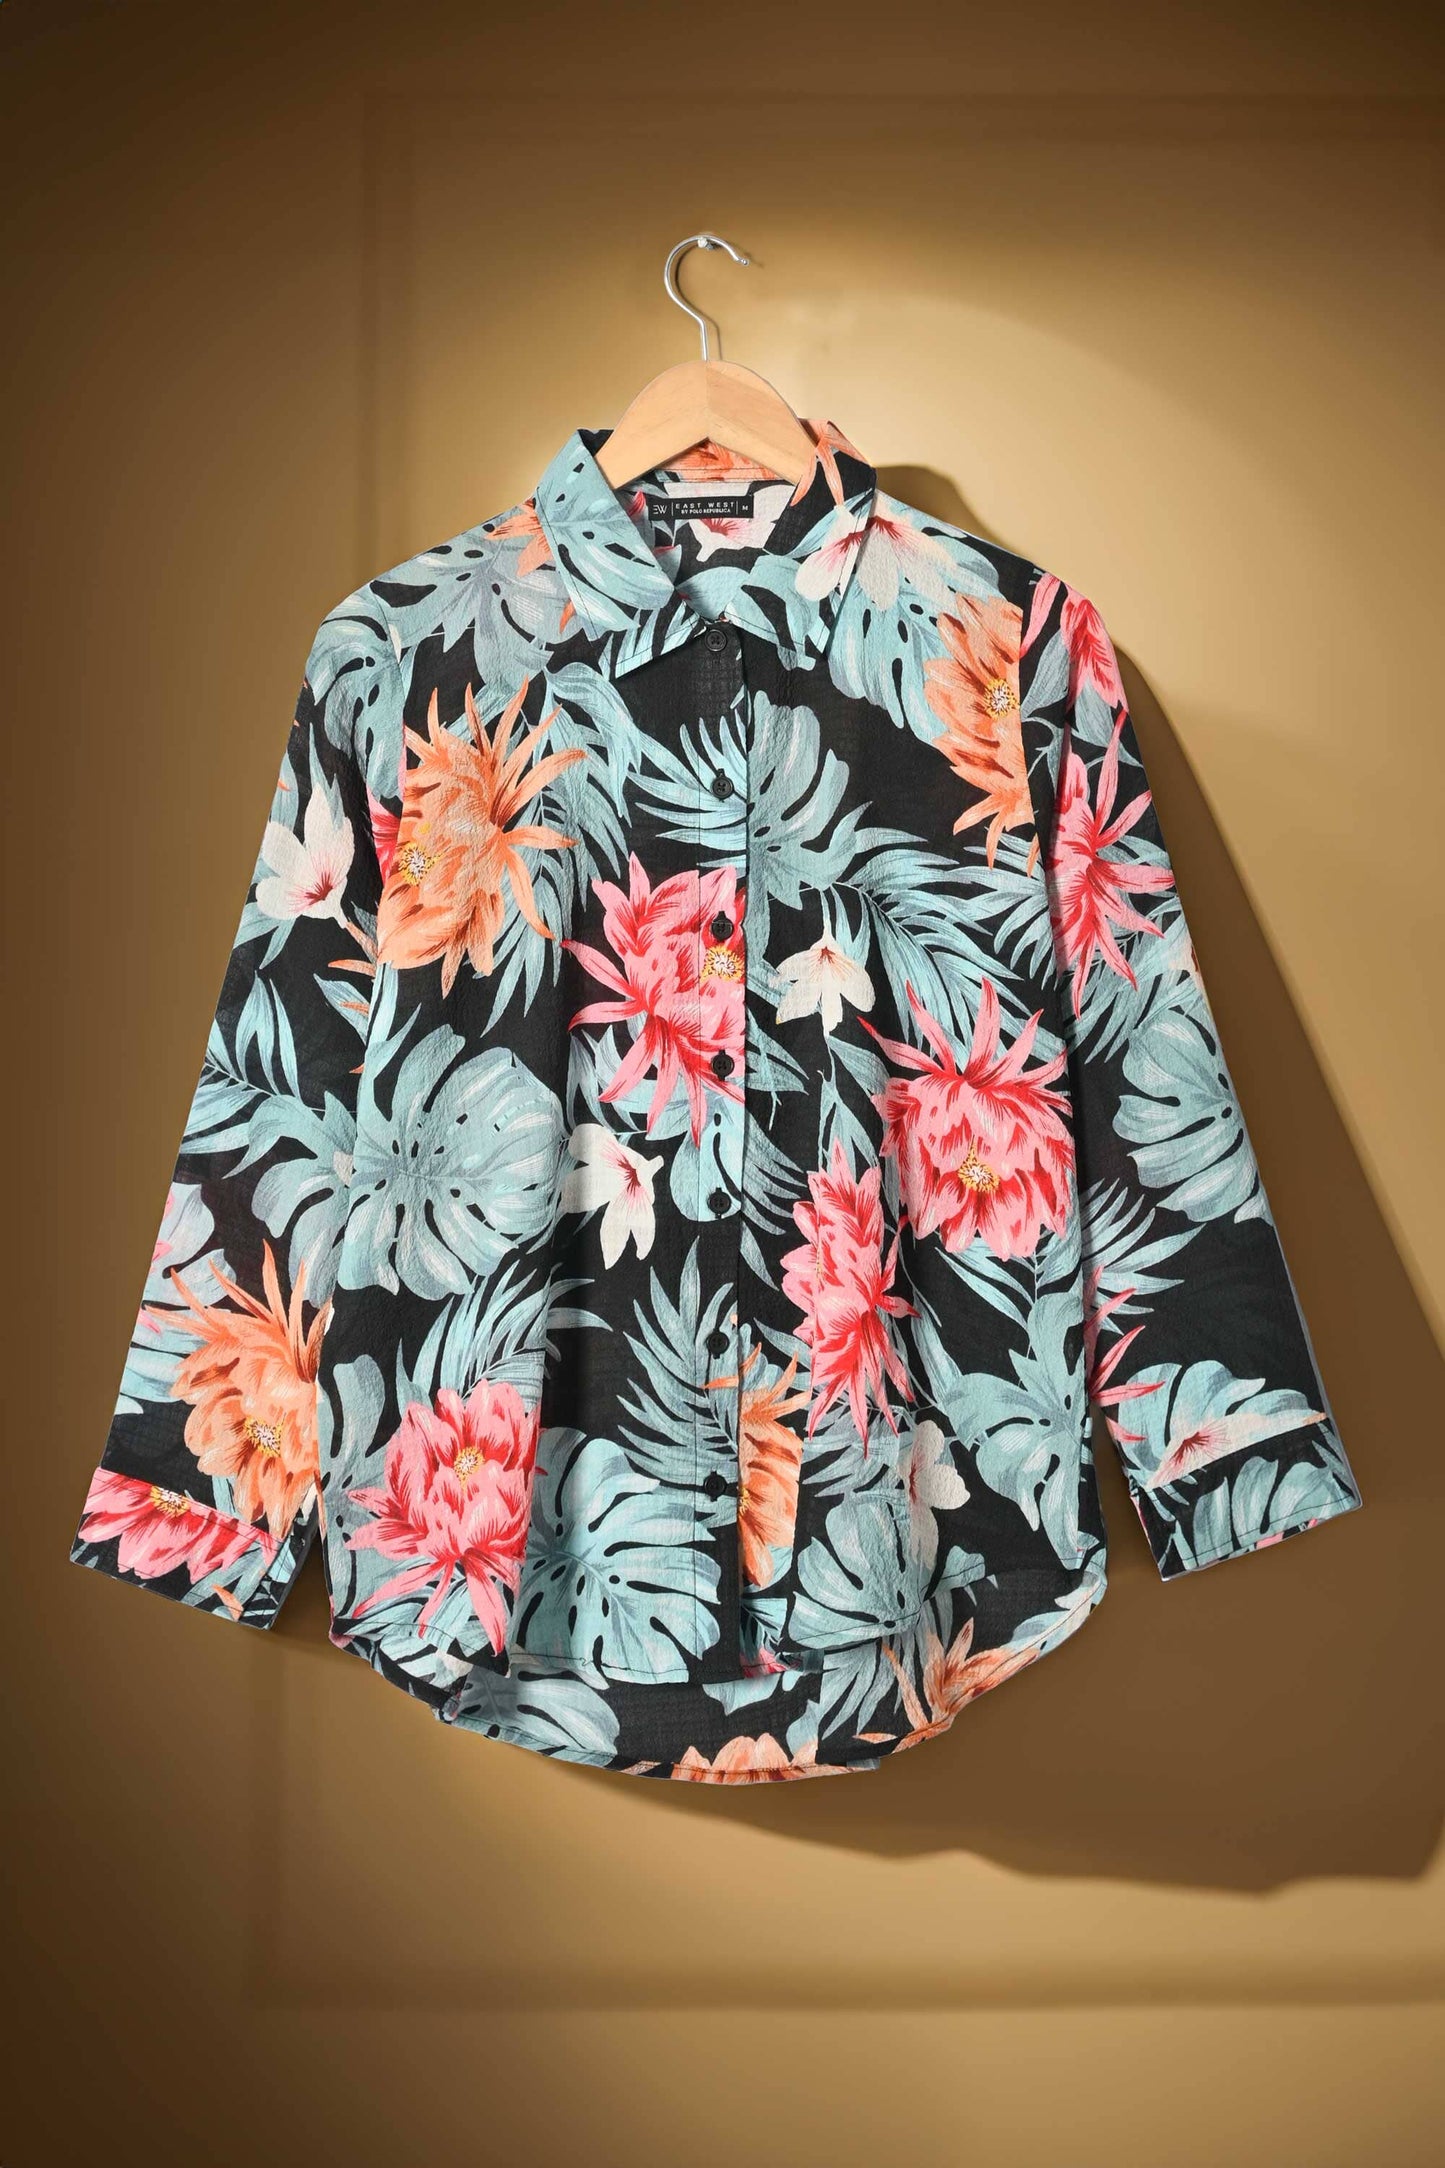 East West Women's Floral Printed Casual Shirt Women's Casual Shirt East West 